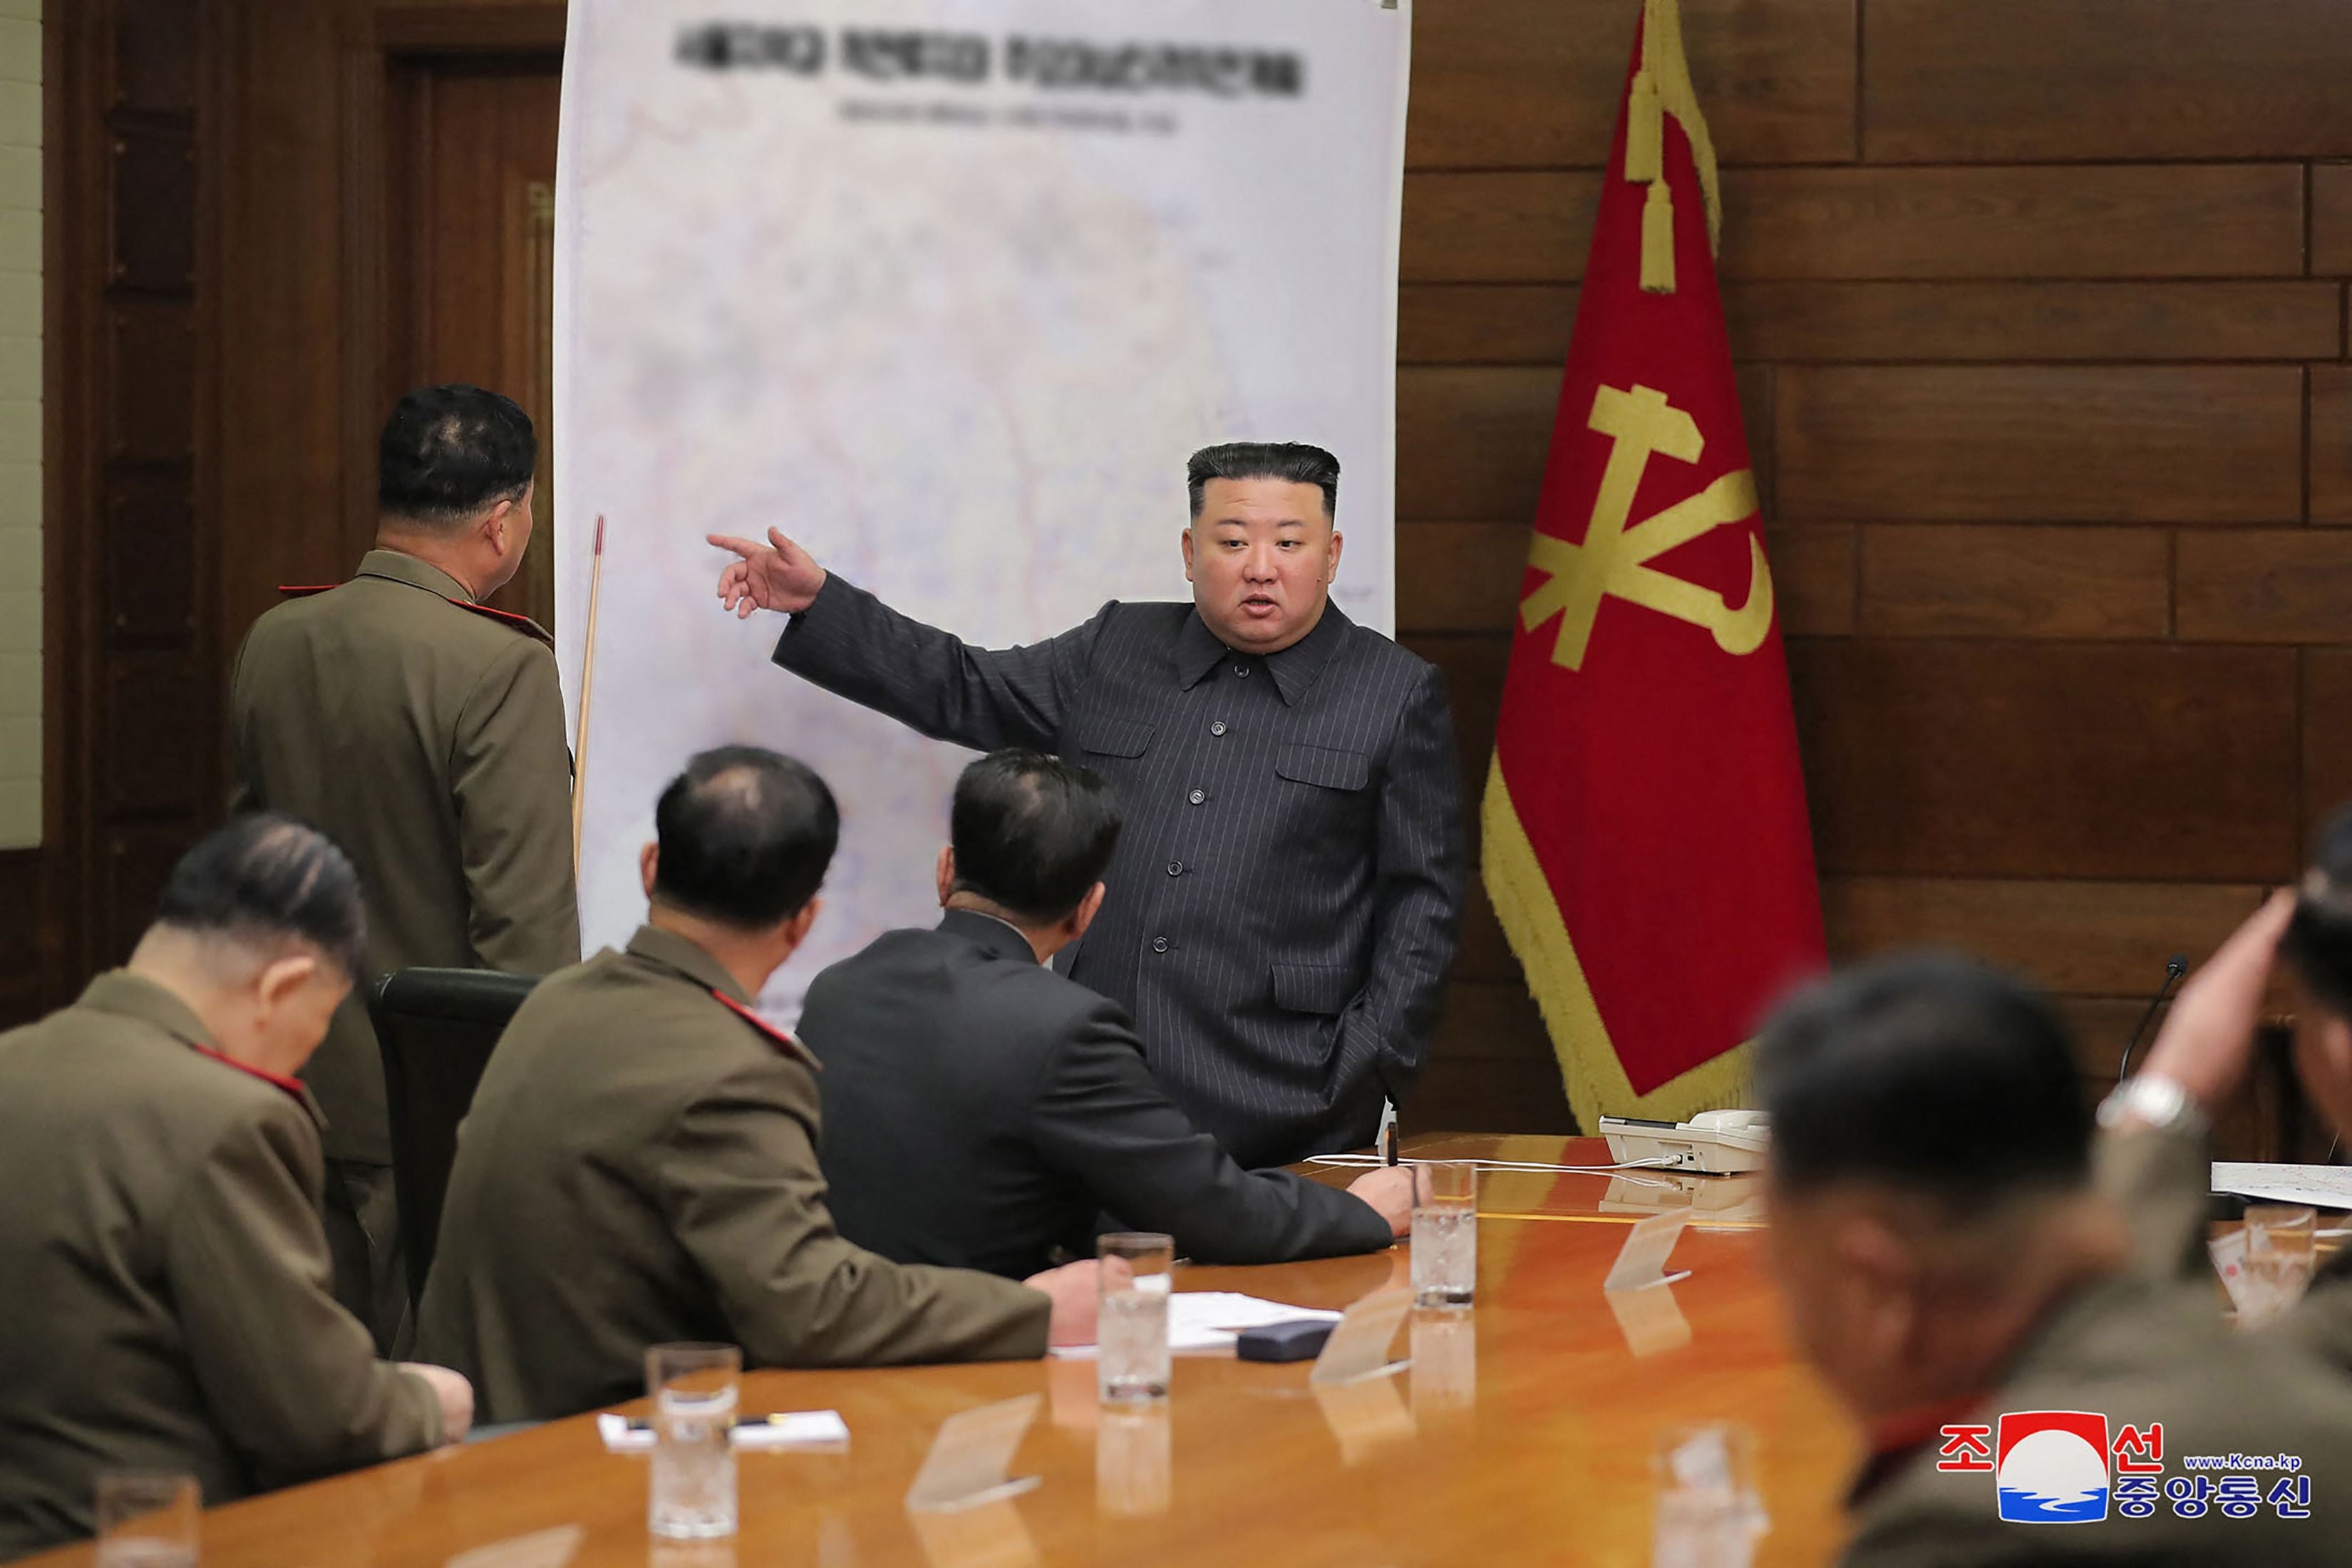 North Korean leader Kim Jong-un (C) gesturing in front of a map while attending the 6th Enlarged Meeting of the 8th Central Military Commission of the Workers' Party of Korea (WPK)